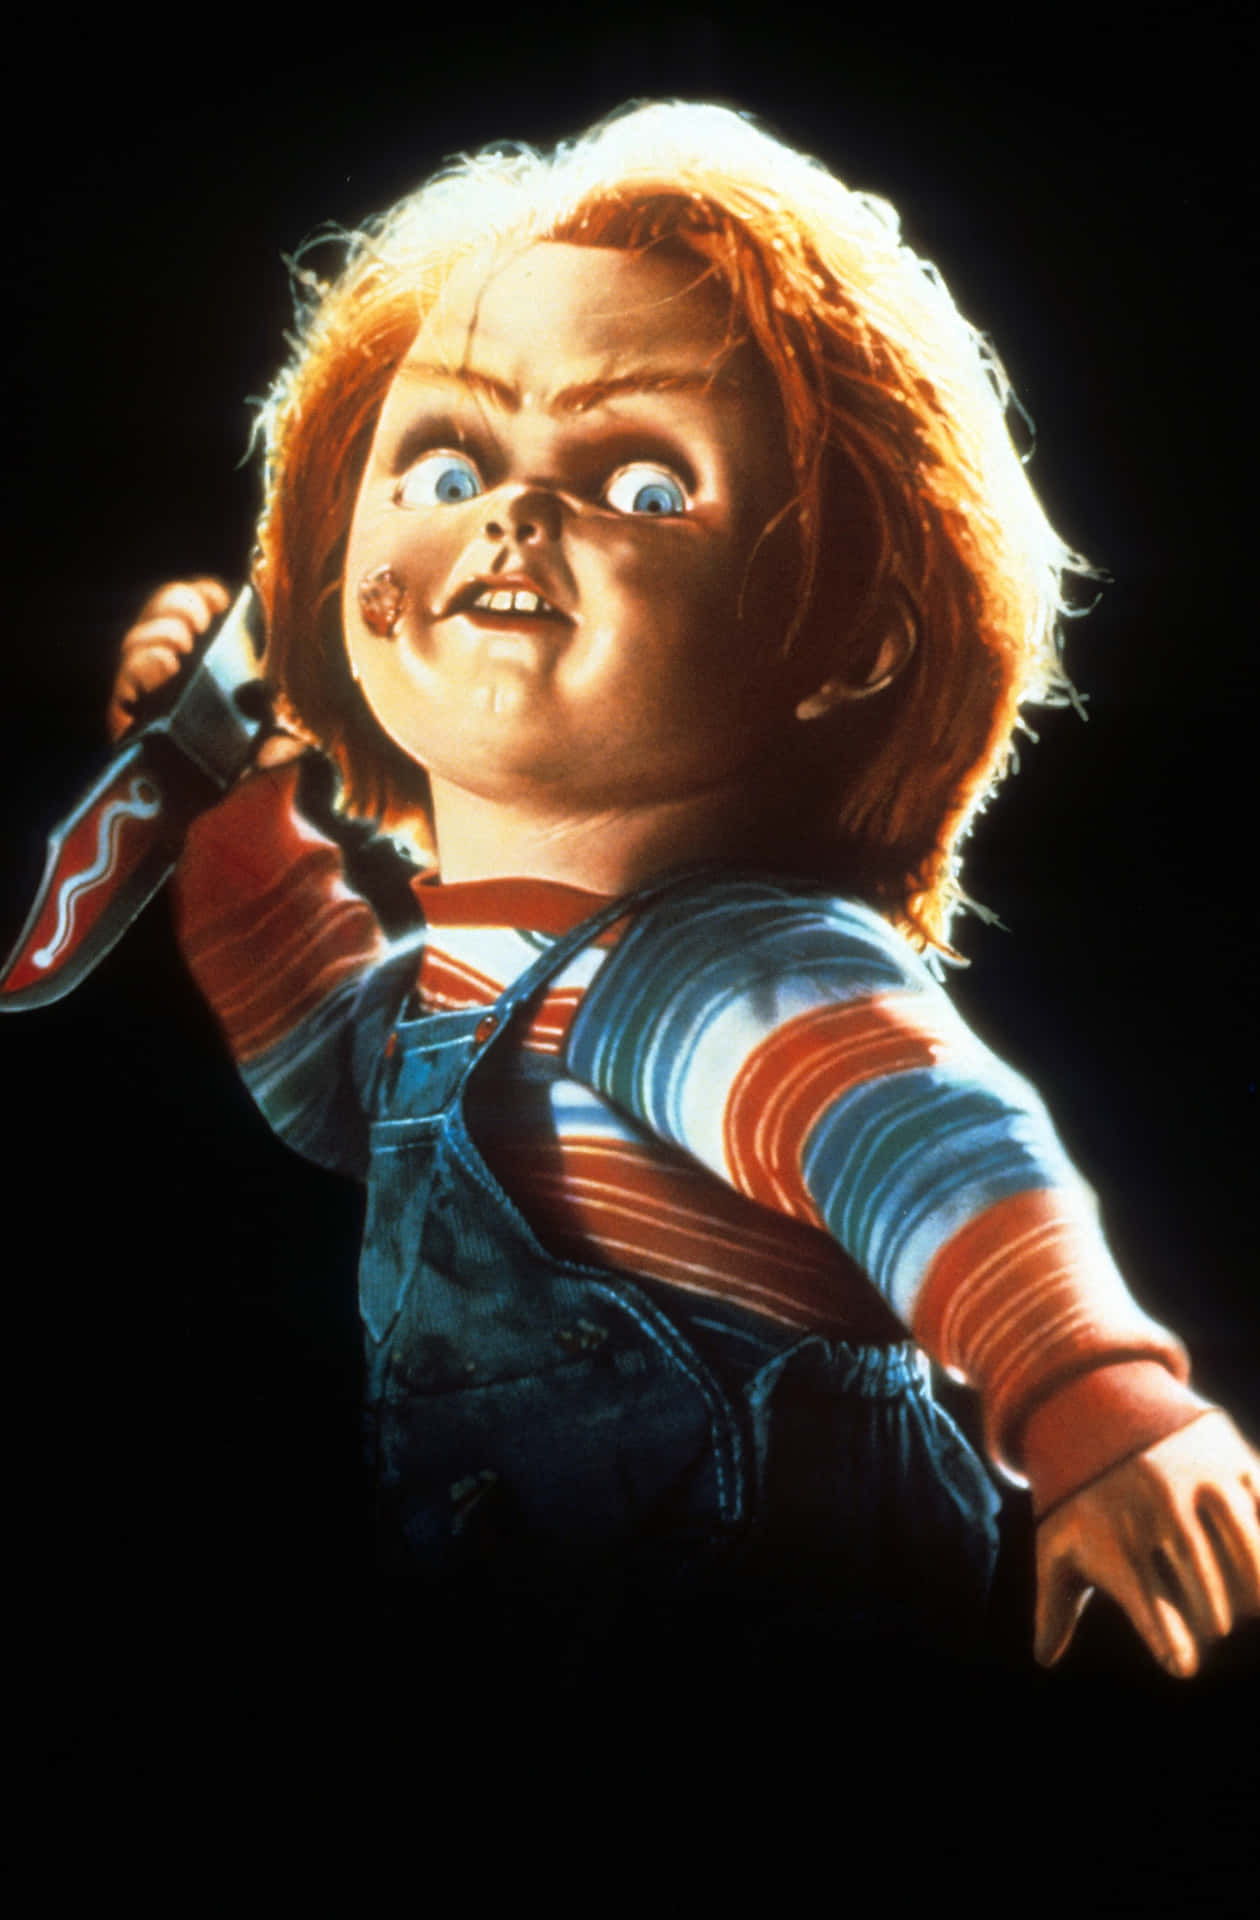 Chucky, The Infamous Horror Doll In A Menacing Pose